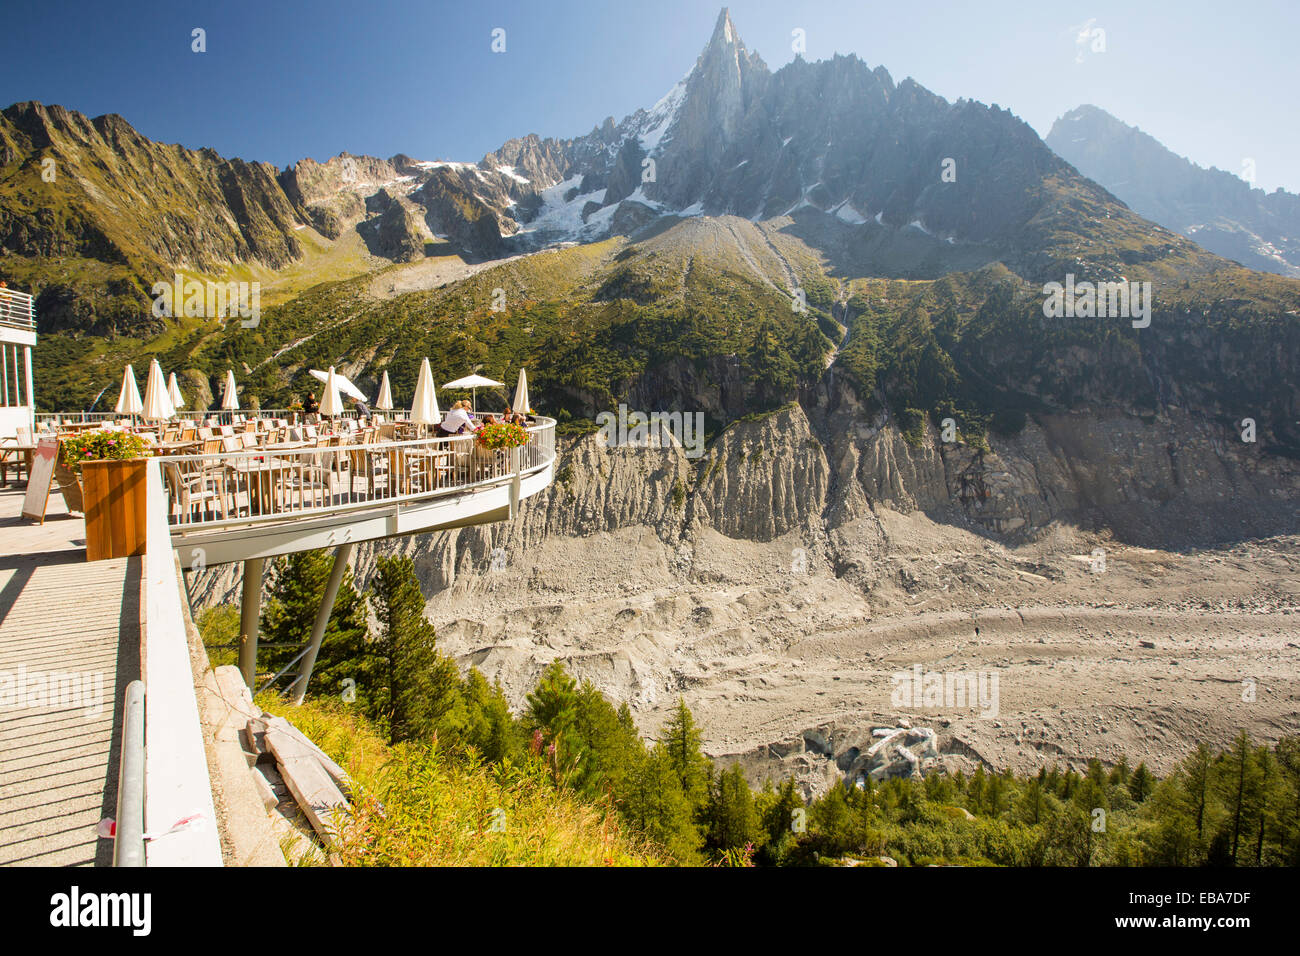 The Mer De Glace which has thinned 150 meters since 1820, and retreated by 2300 Metres, with a balcony cafe overlooking the rapidly shrinking glacier. Stock Photo